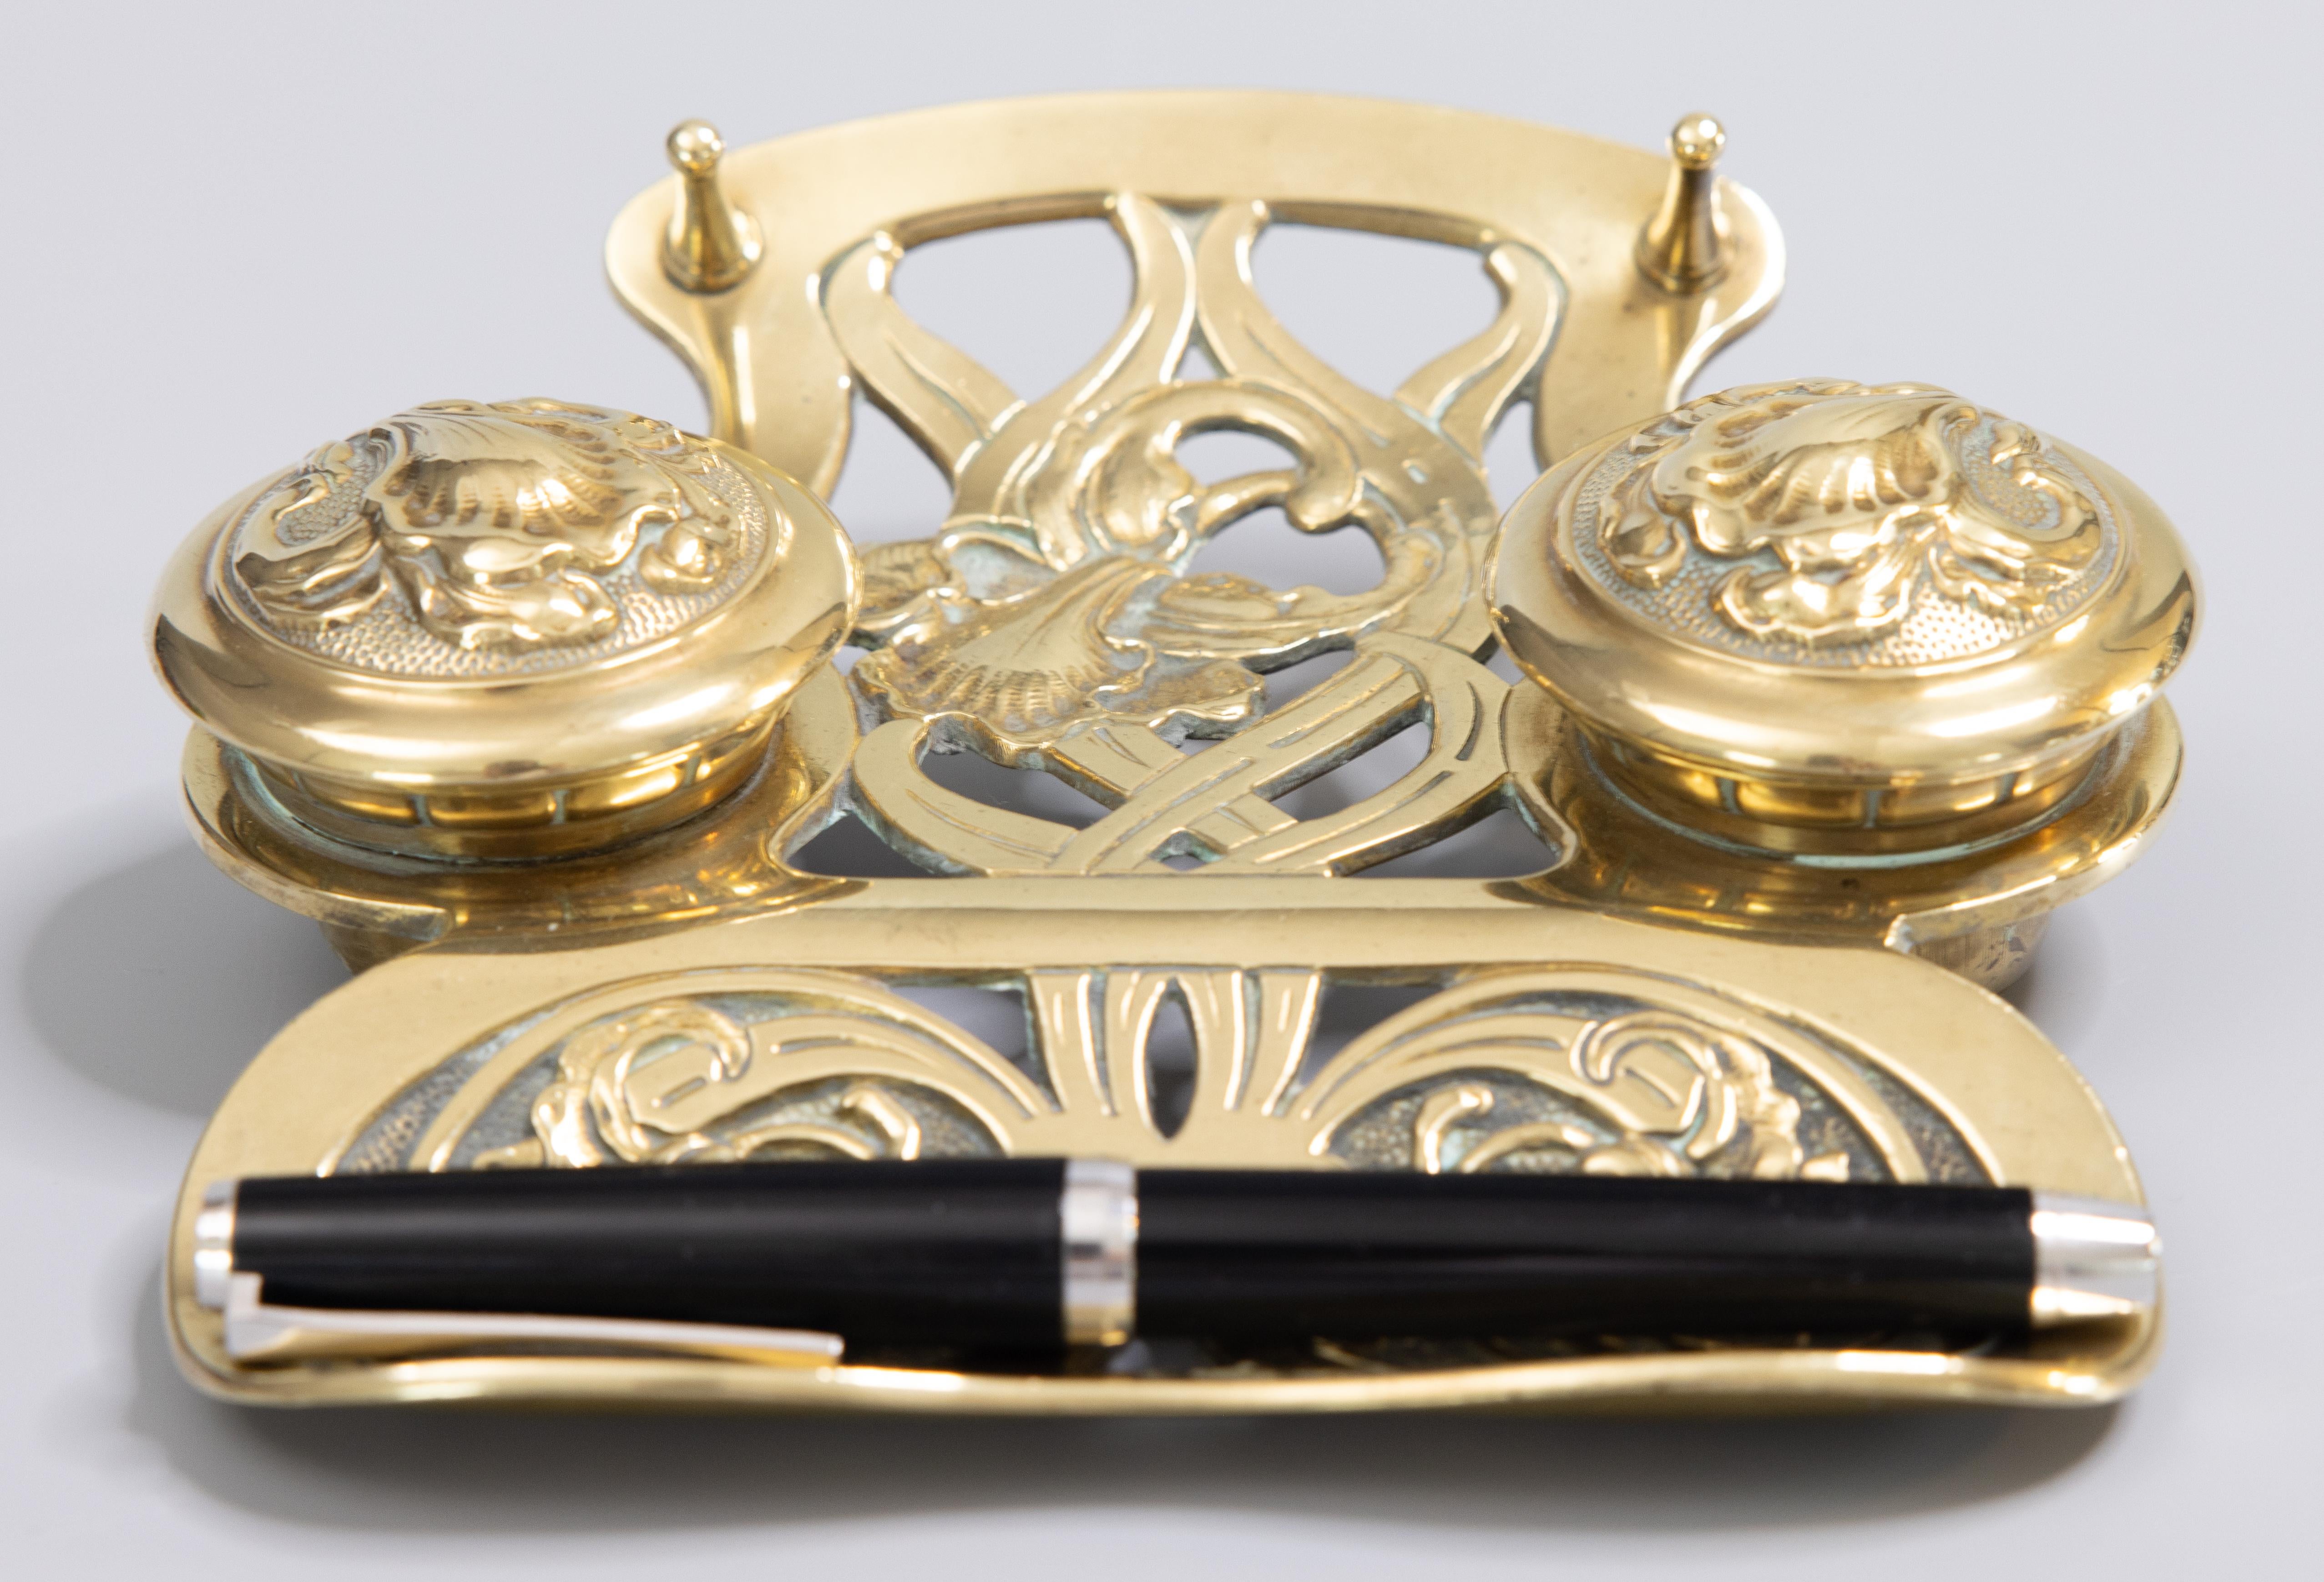 A superb antique Art Nouveau Jugendstil German cast brass double inkwell inkstand with a pen rest and pen tray, circa 1900. The base is stamped 